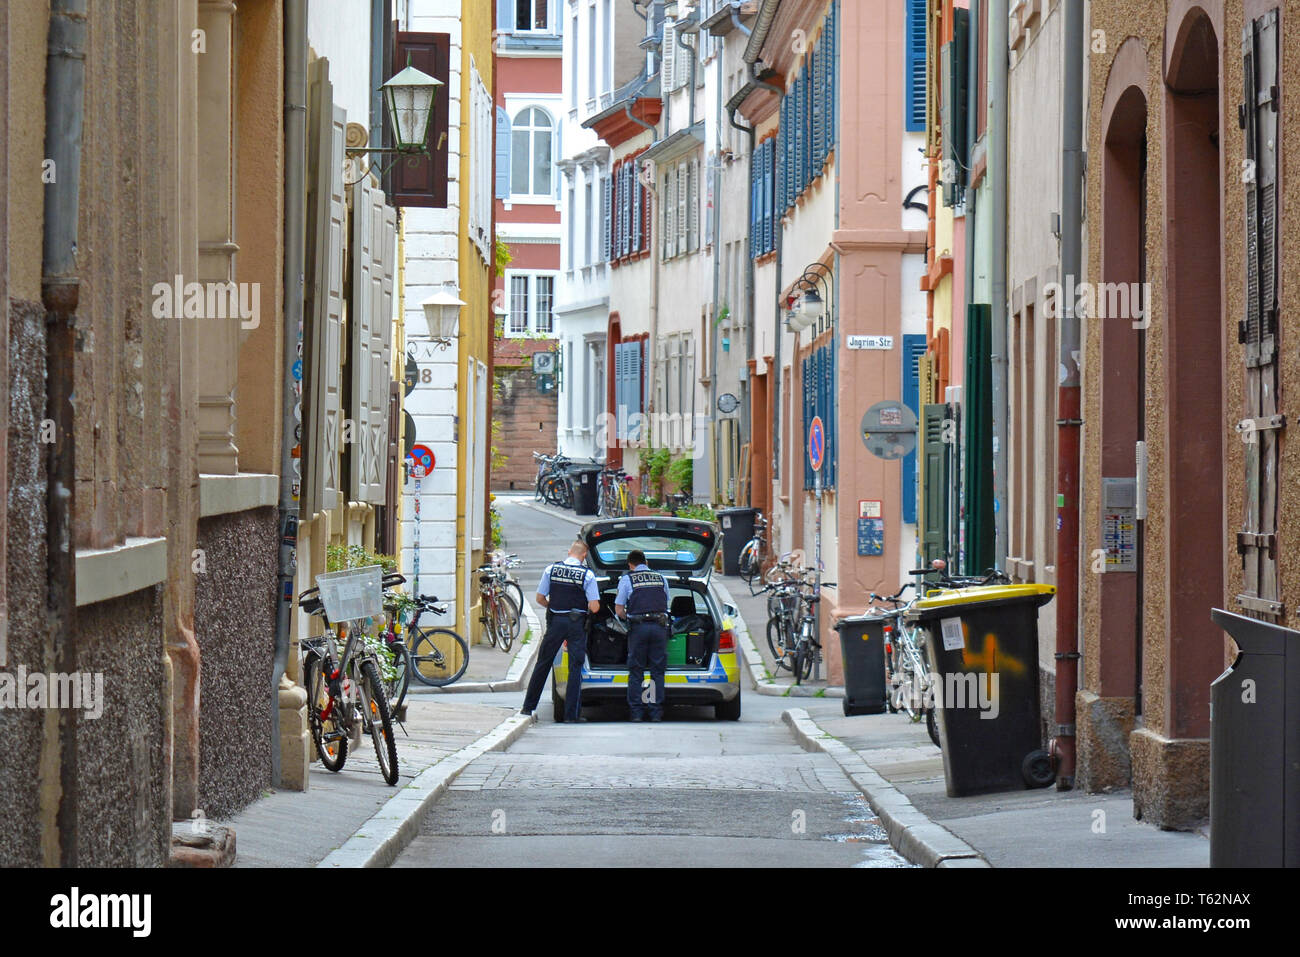 Police car with two officers on patrol in side street of historical city center of Heidelberg in Germany Stock Photo